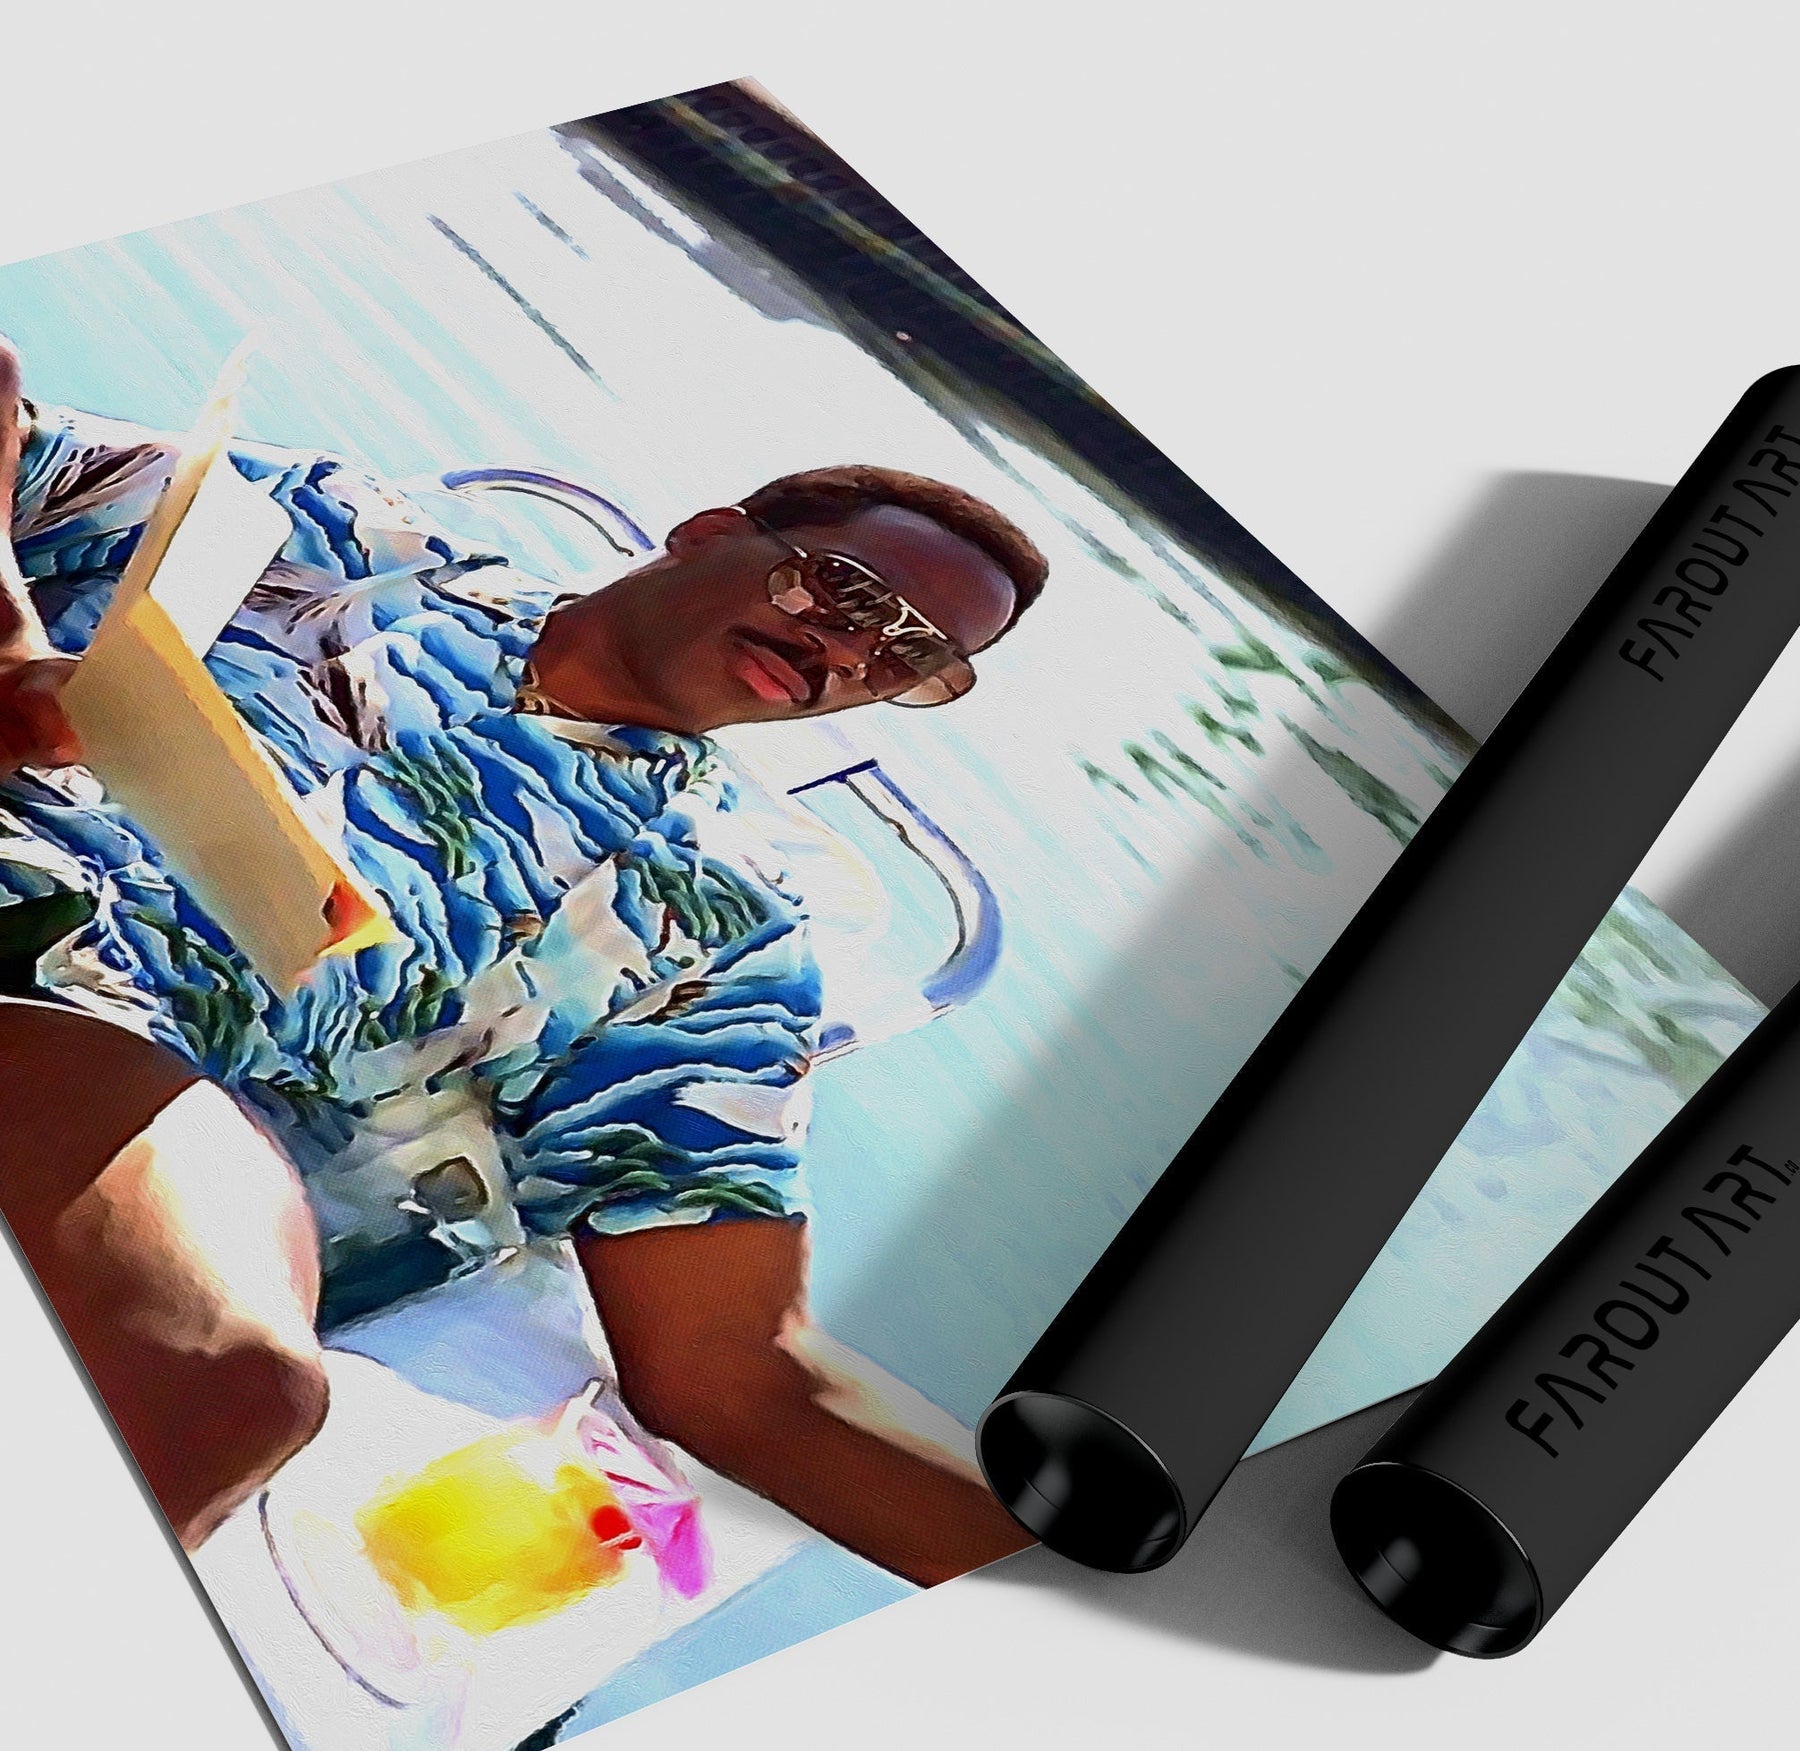 Beverly Hills Cop Pool Time Poster/Canvas | Far Out Art 